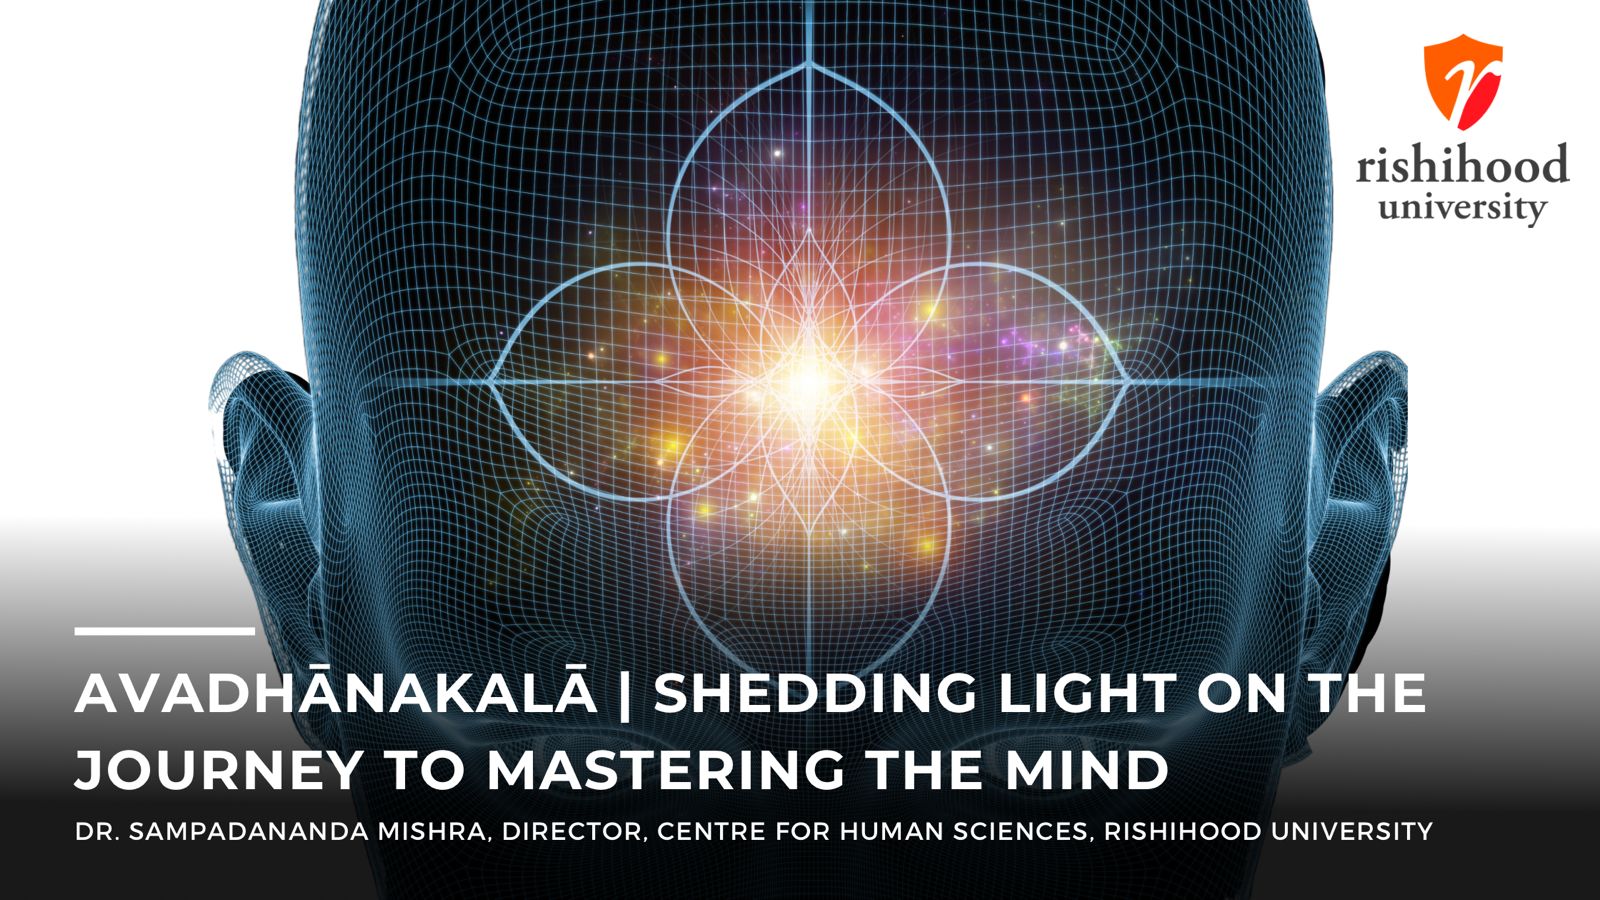 Shedding Light on the Journey to Mastering the Mind